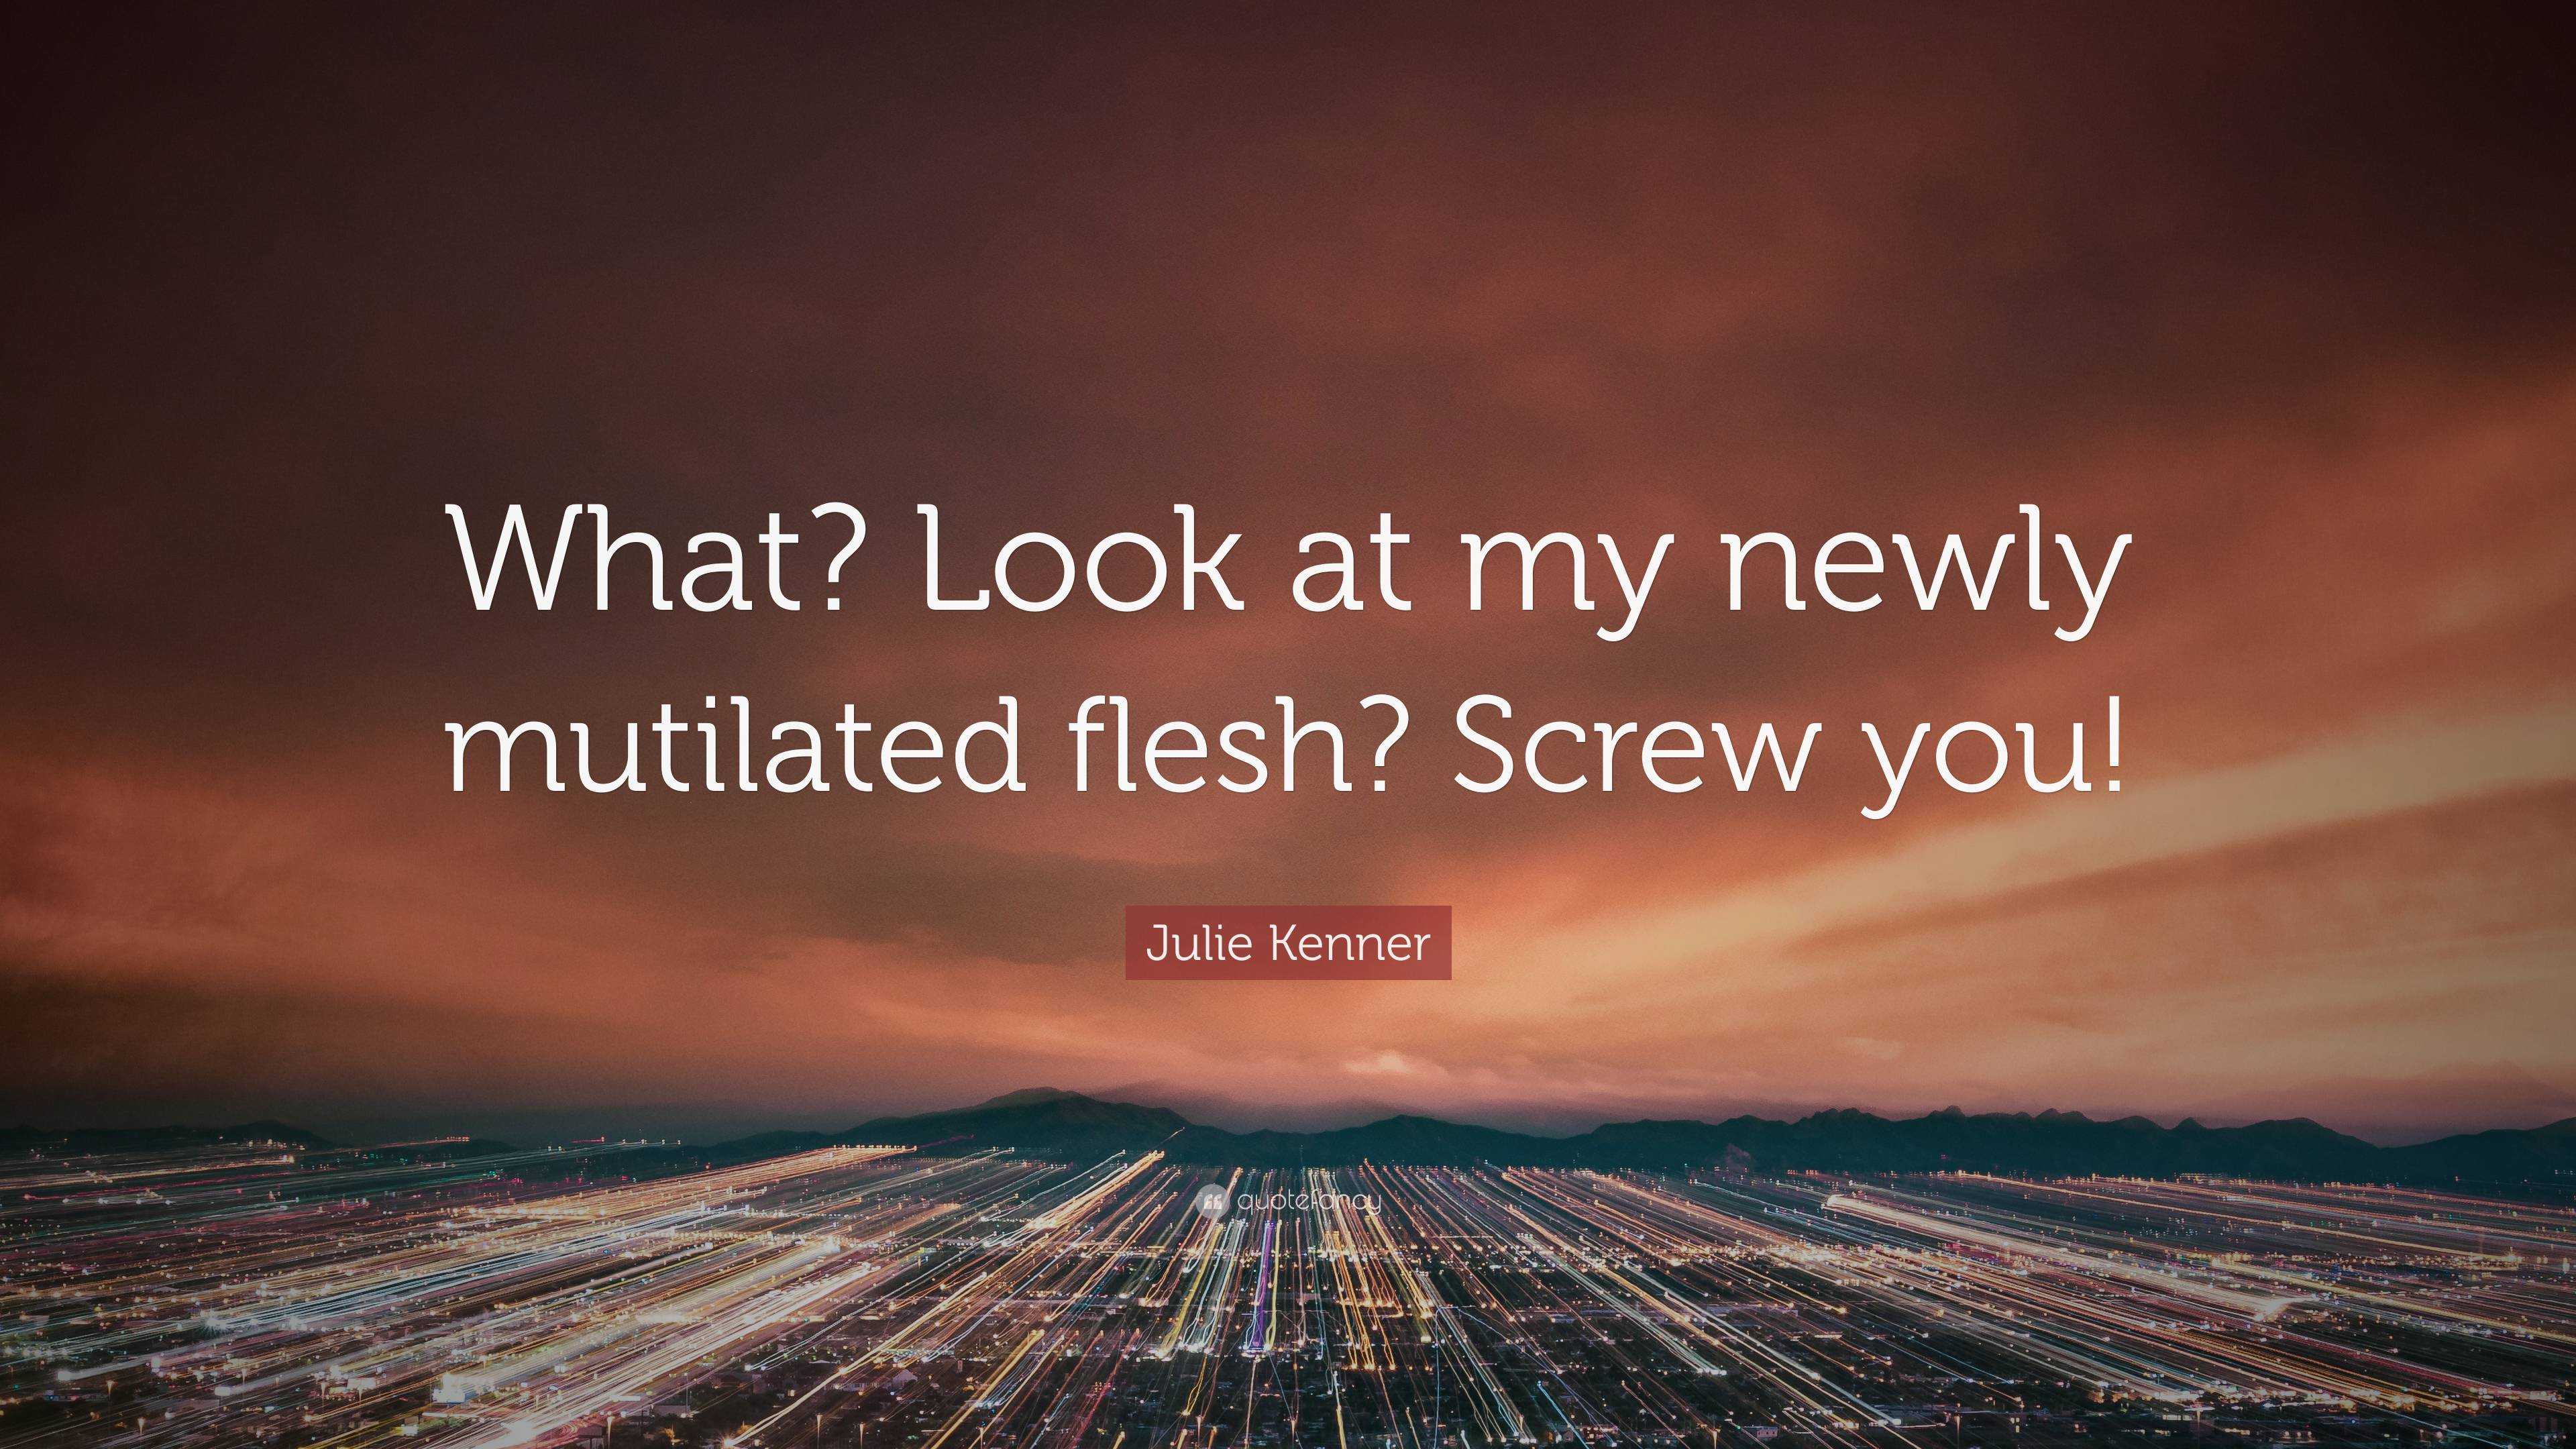 Julie Kenner Quote: “What? Look at my newly mutilated flesh? Screw you!”